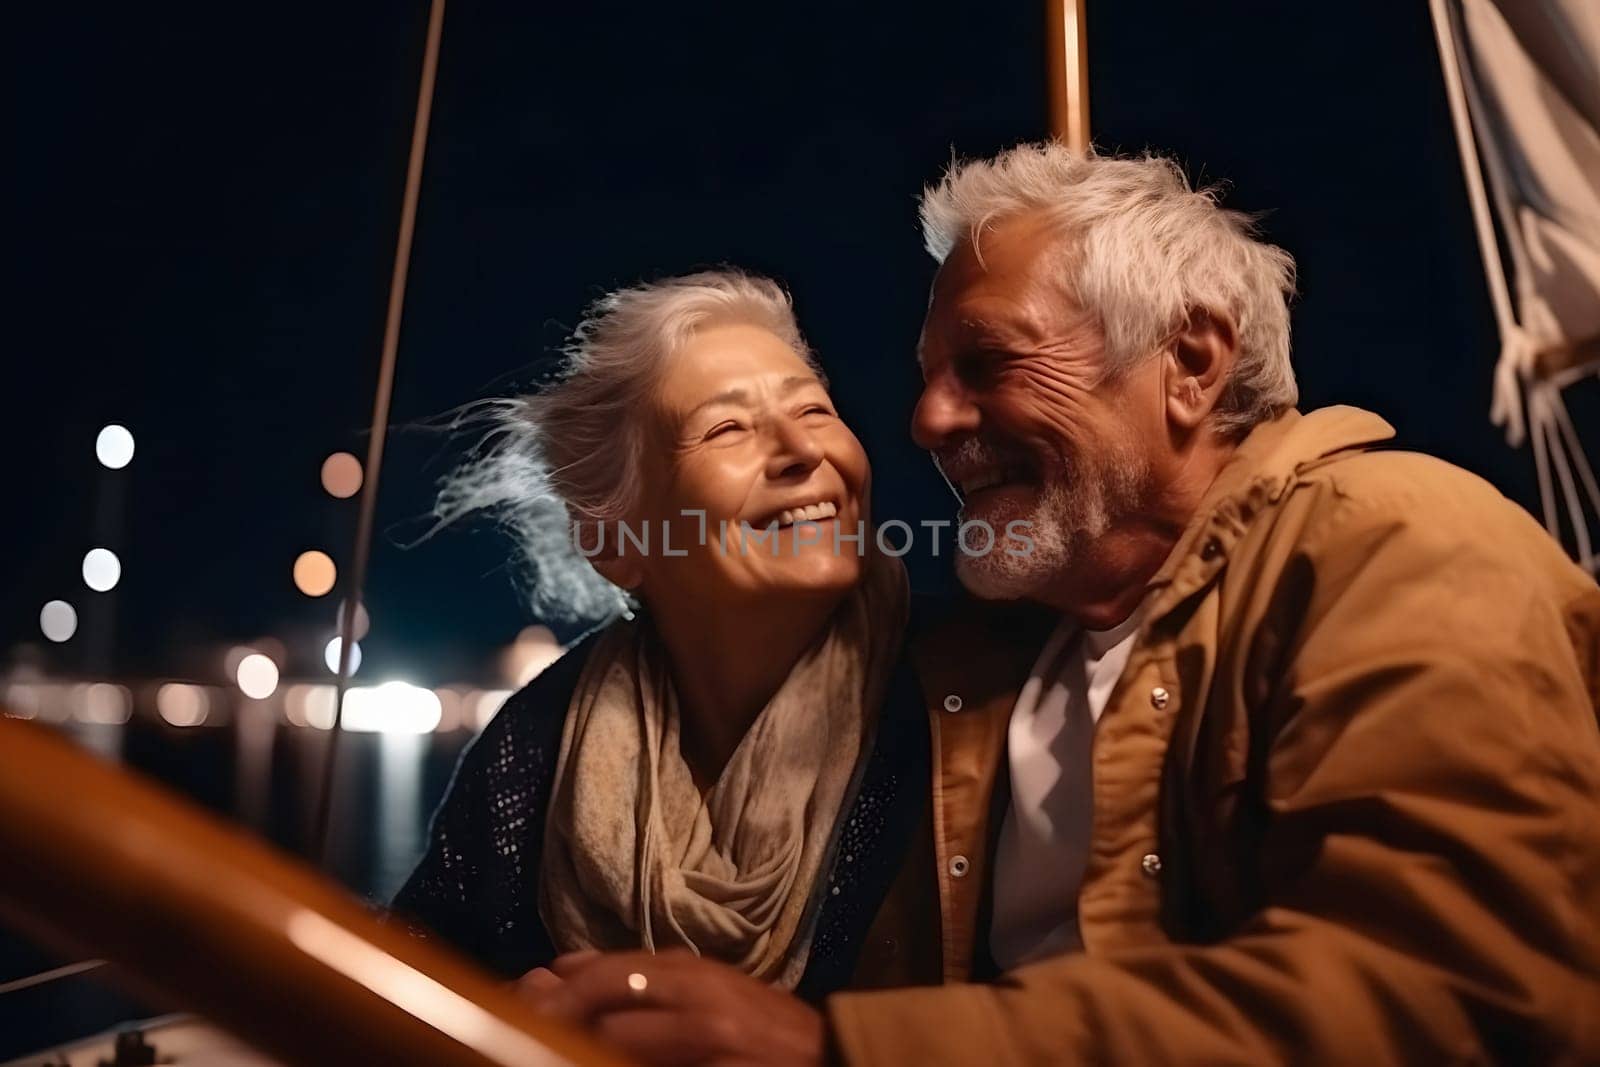 Beautiful and happy senior caucasian couple on a sailboat at night, neural network generated image by z1b